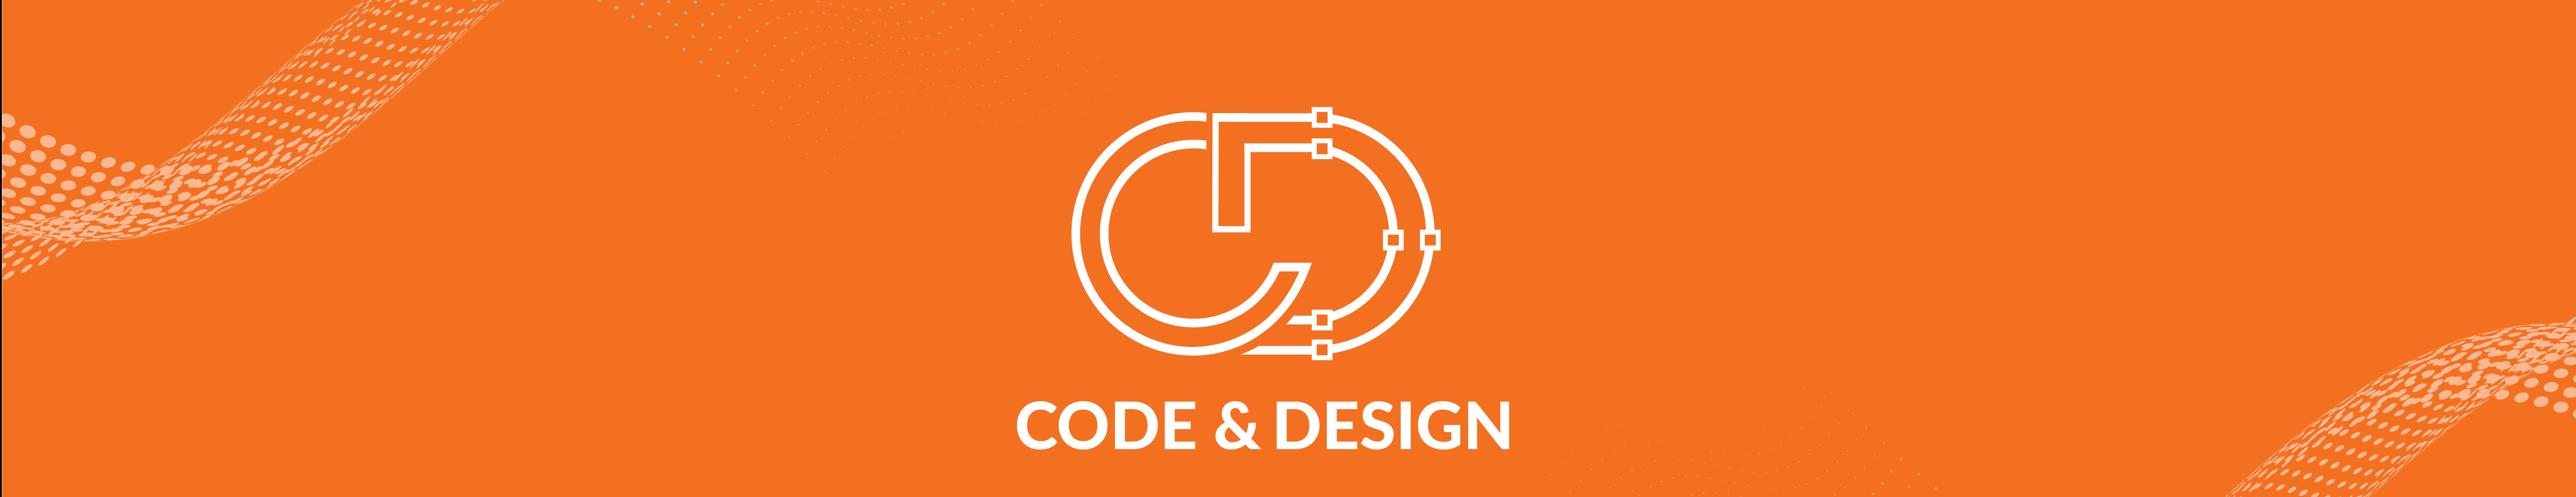 Code_And _Design's profile banner